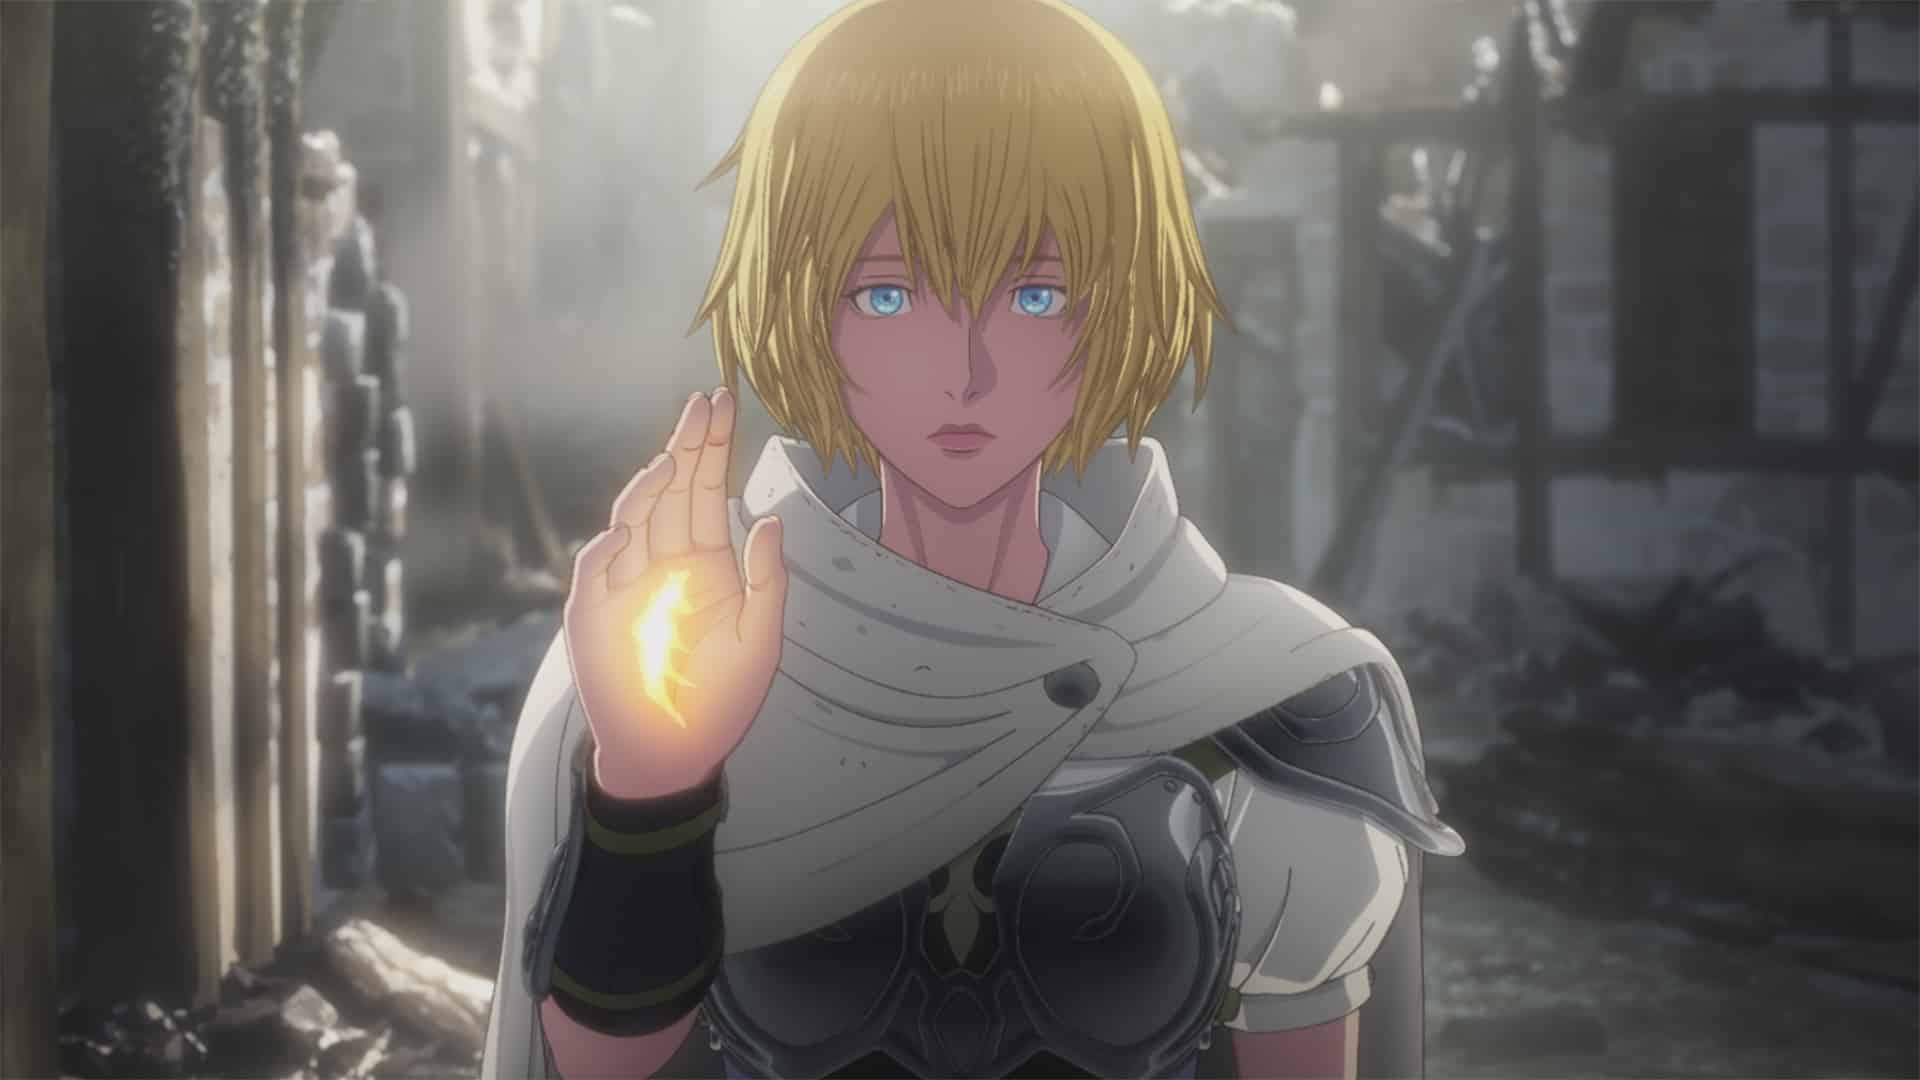 Netflix's Dragon's Dogma Anime Series Gets its First Trailer